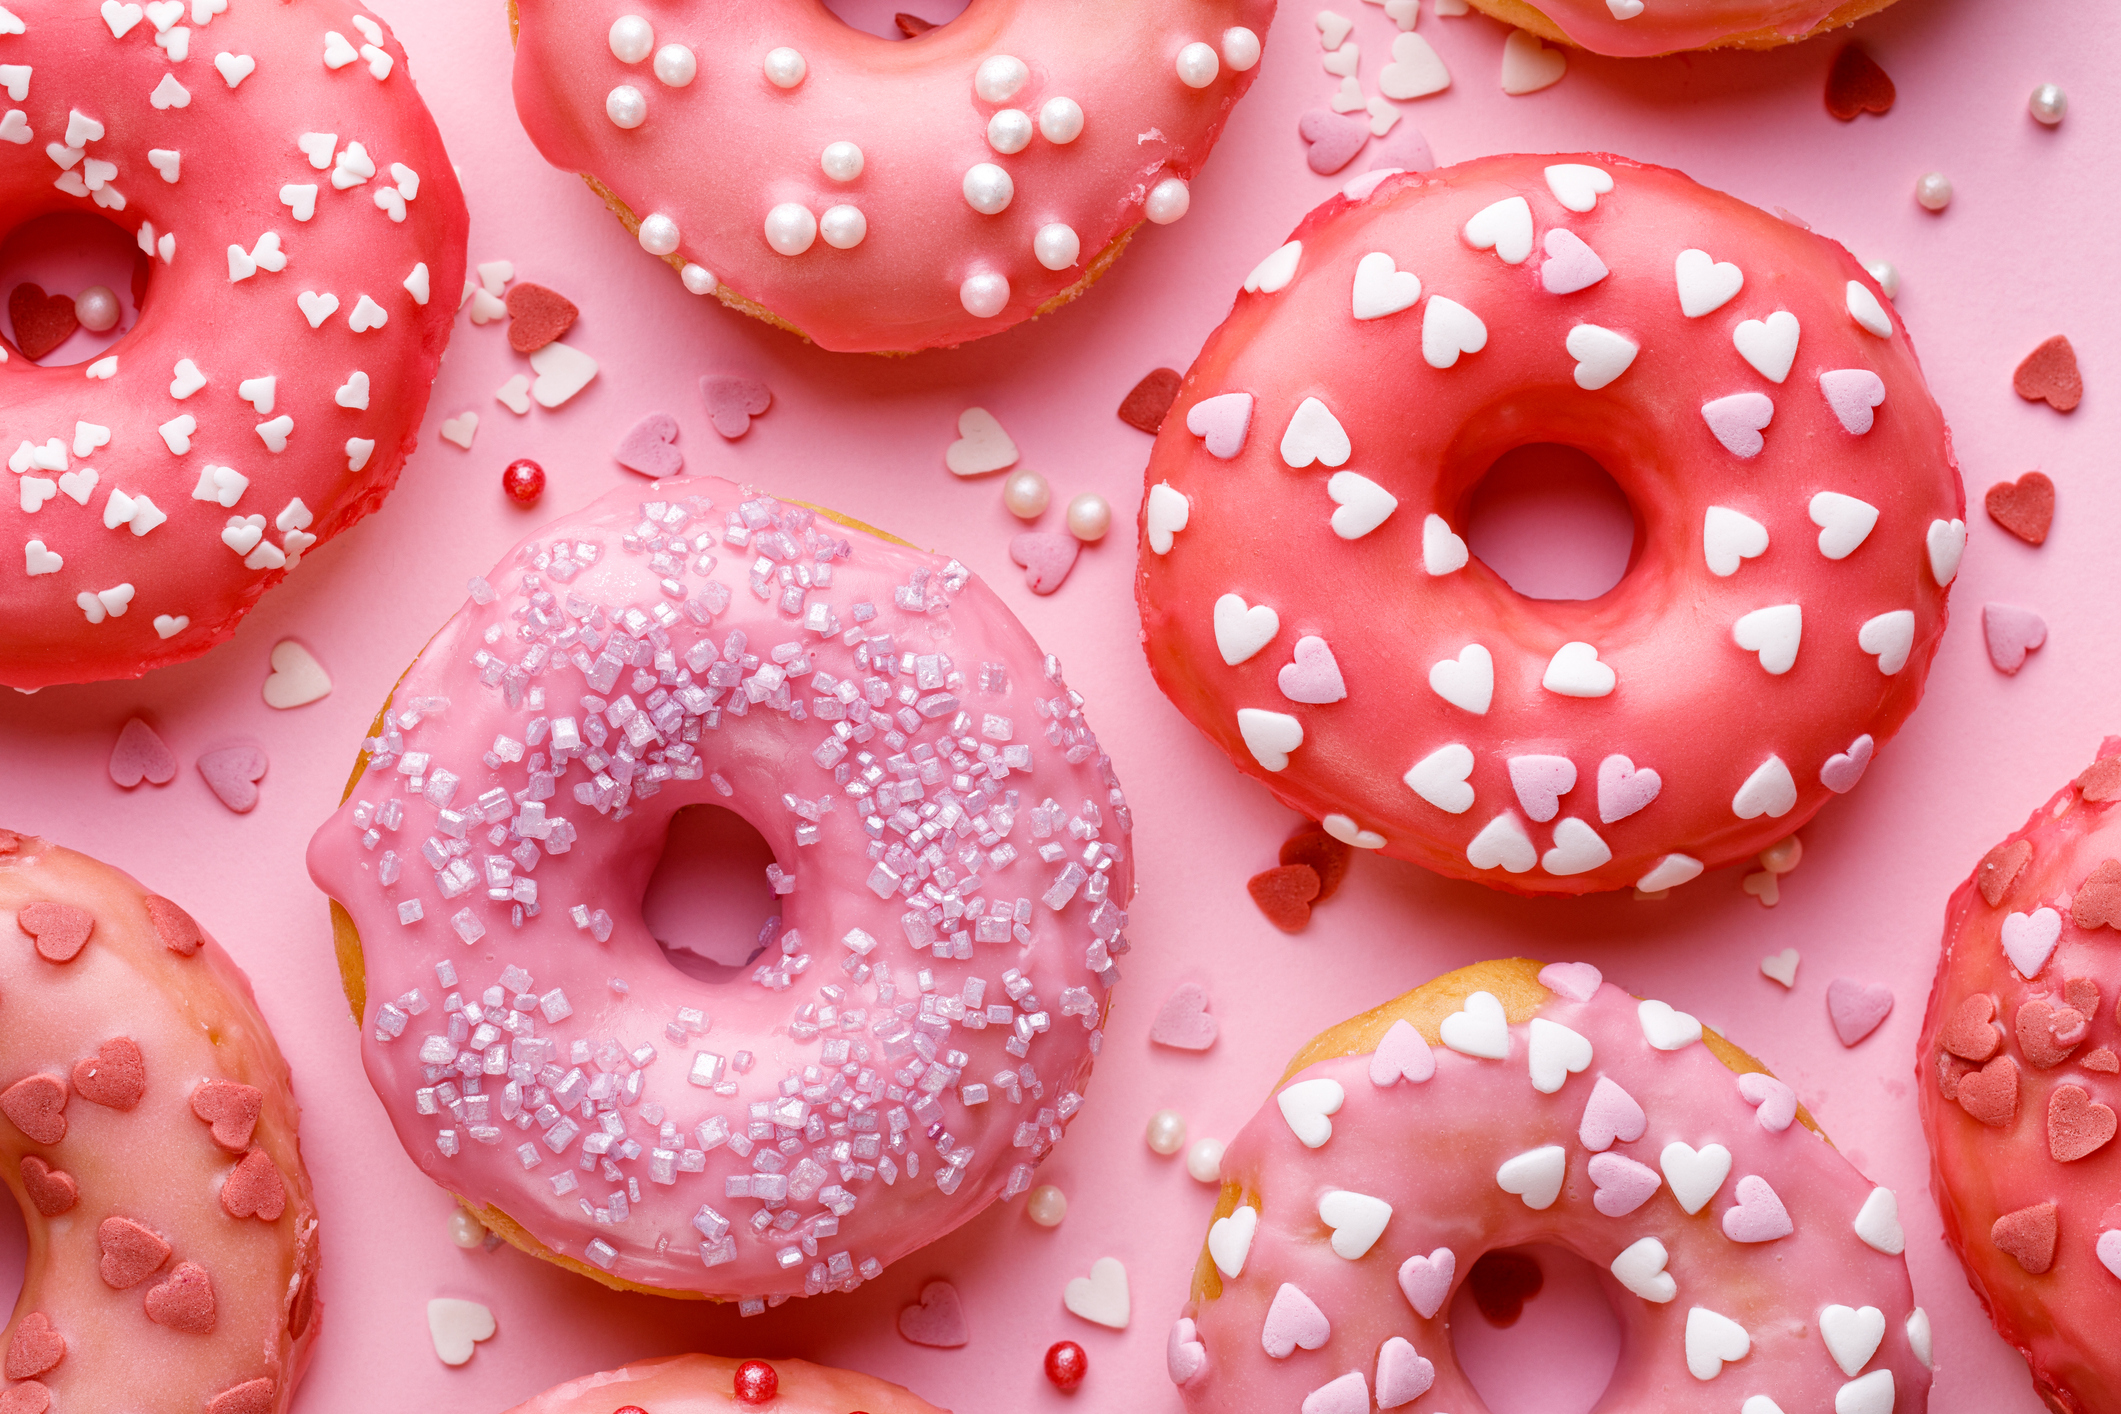 Sweet donuts with pink glaze decorating sprinkles on a pink background